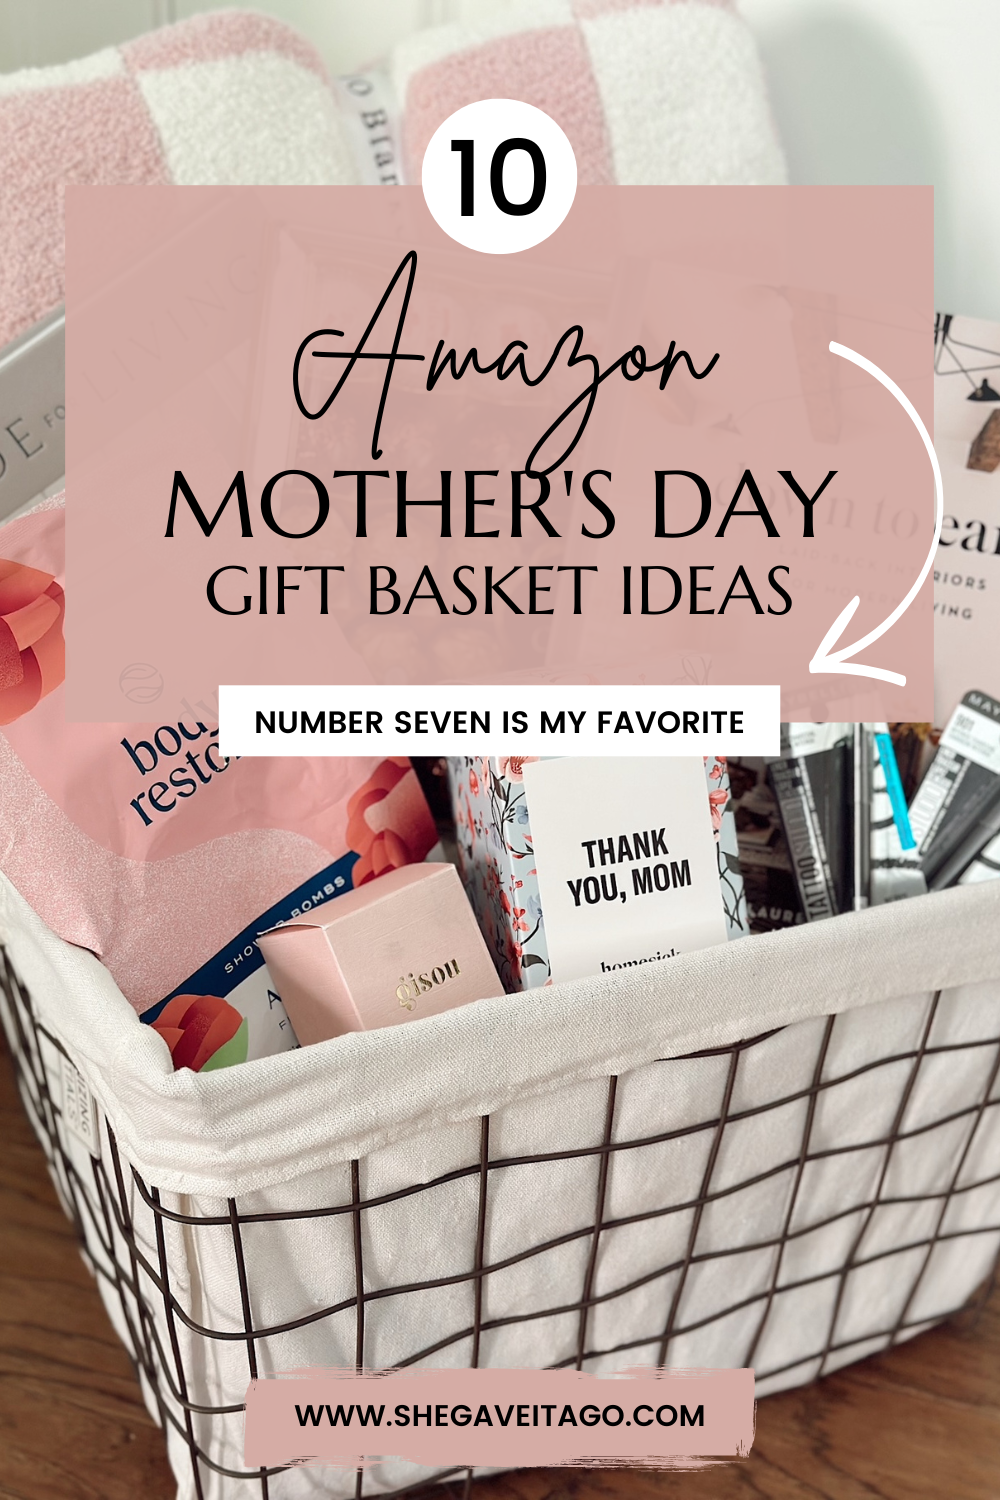 Pinterest pin of Amazon Mother's Day gift basket